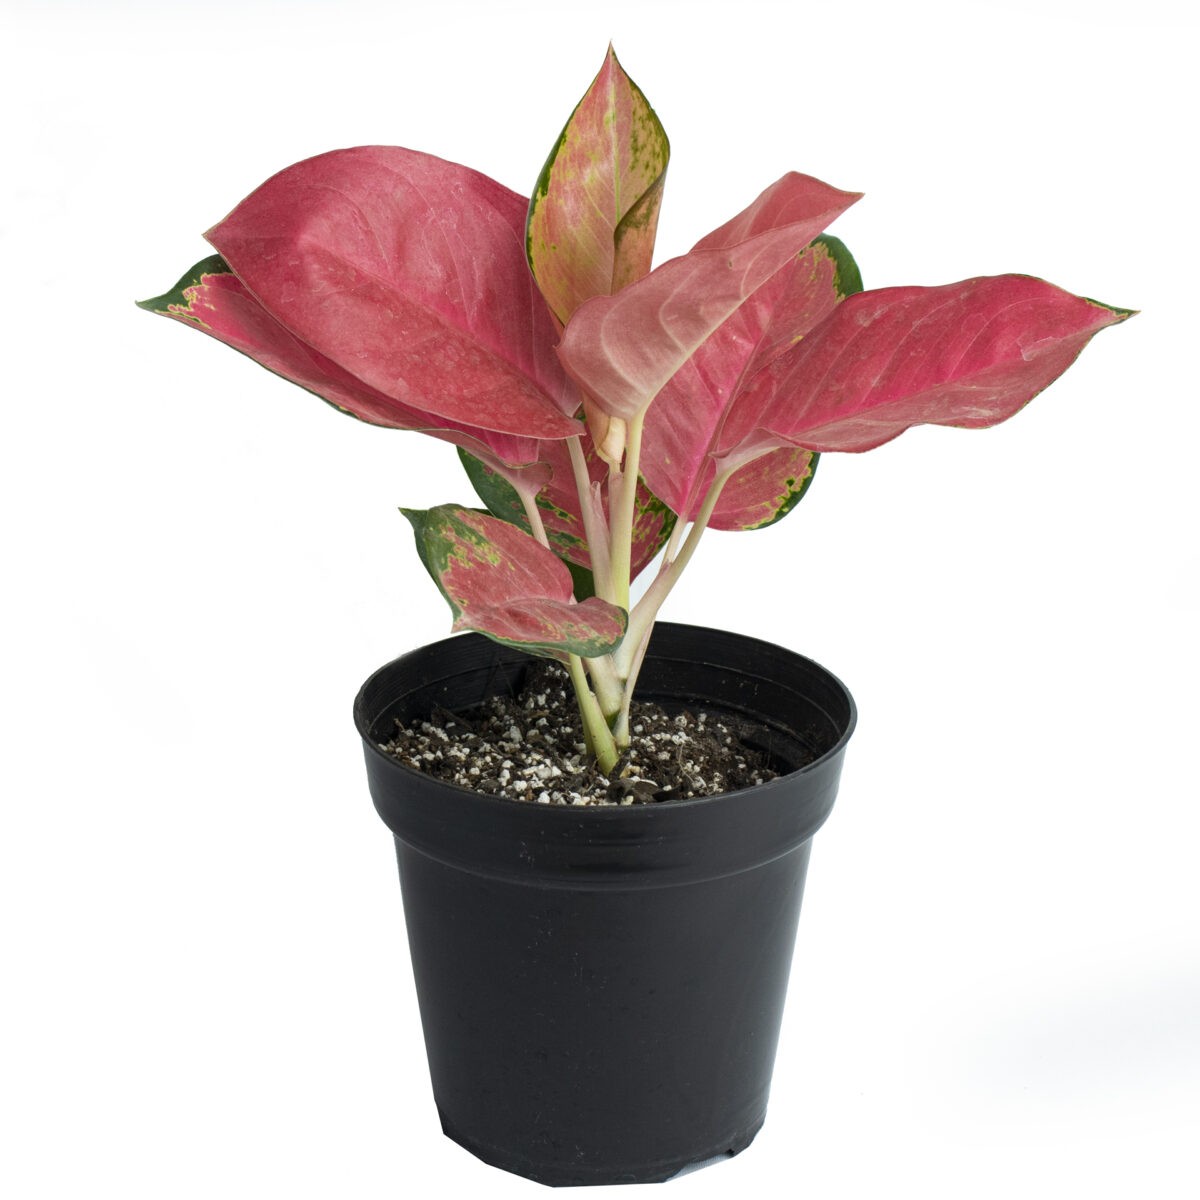 Aglaonema ‘Suksom Jaipong’ plant indoor for office desk plant or table top plant